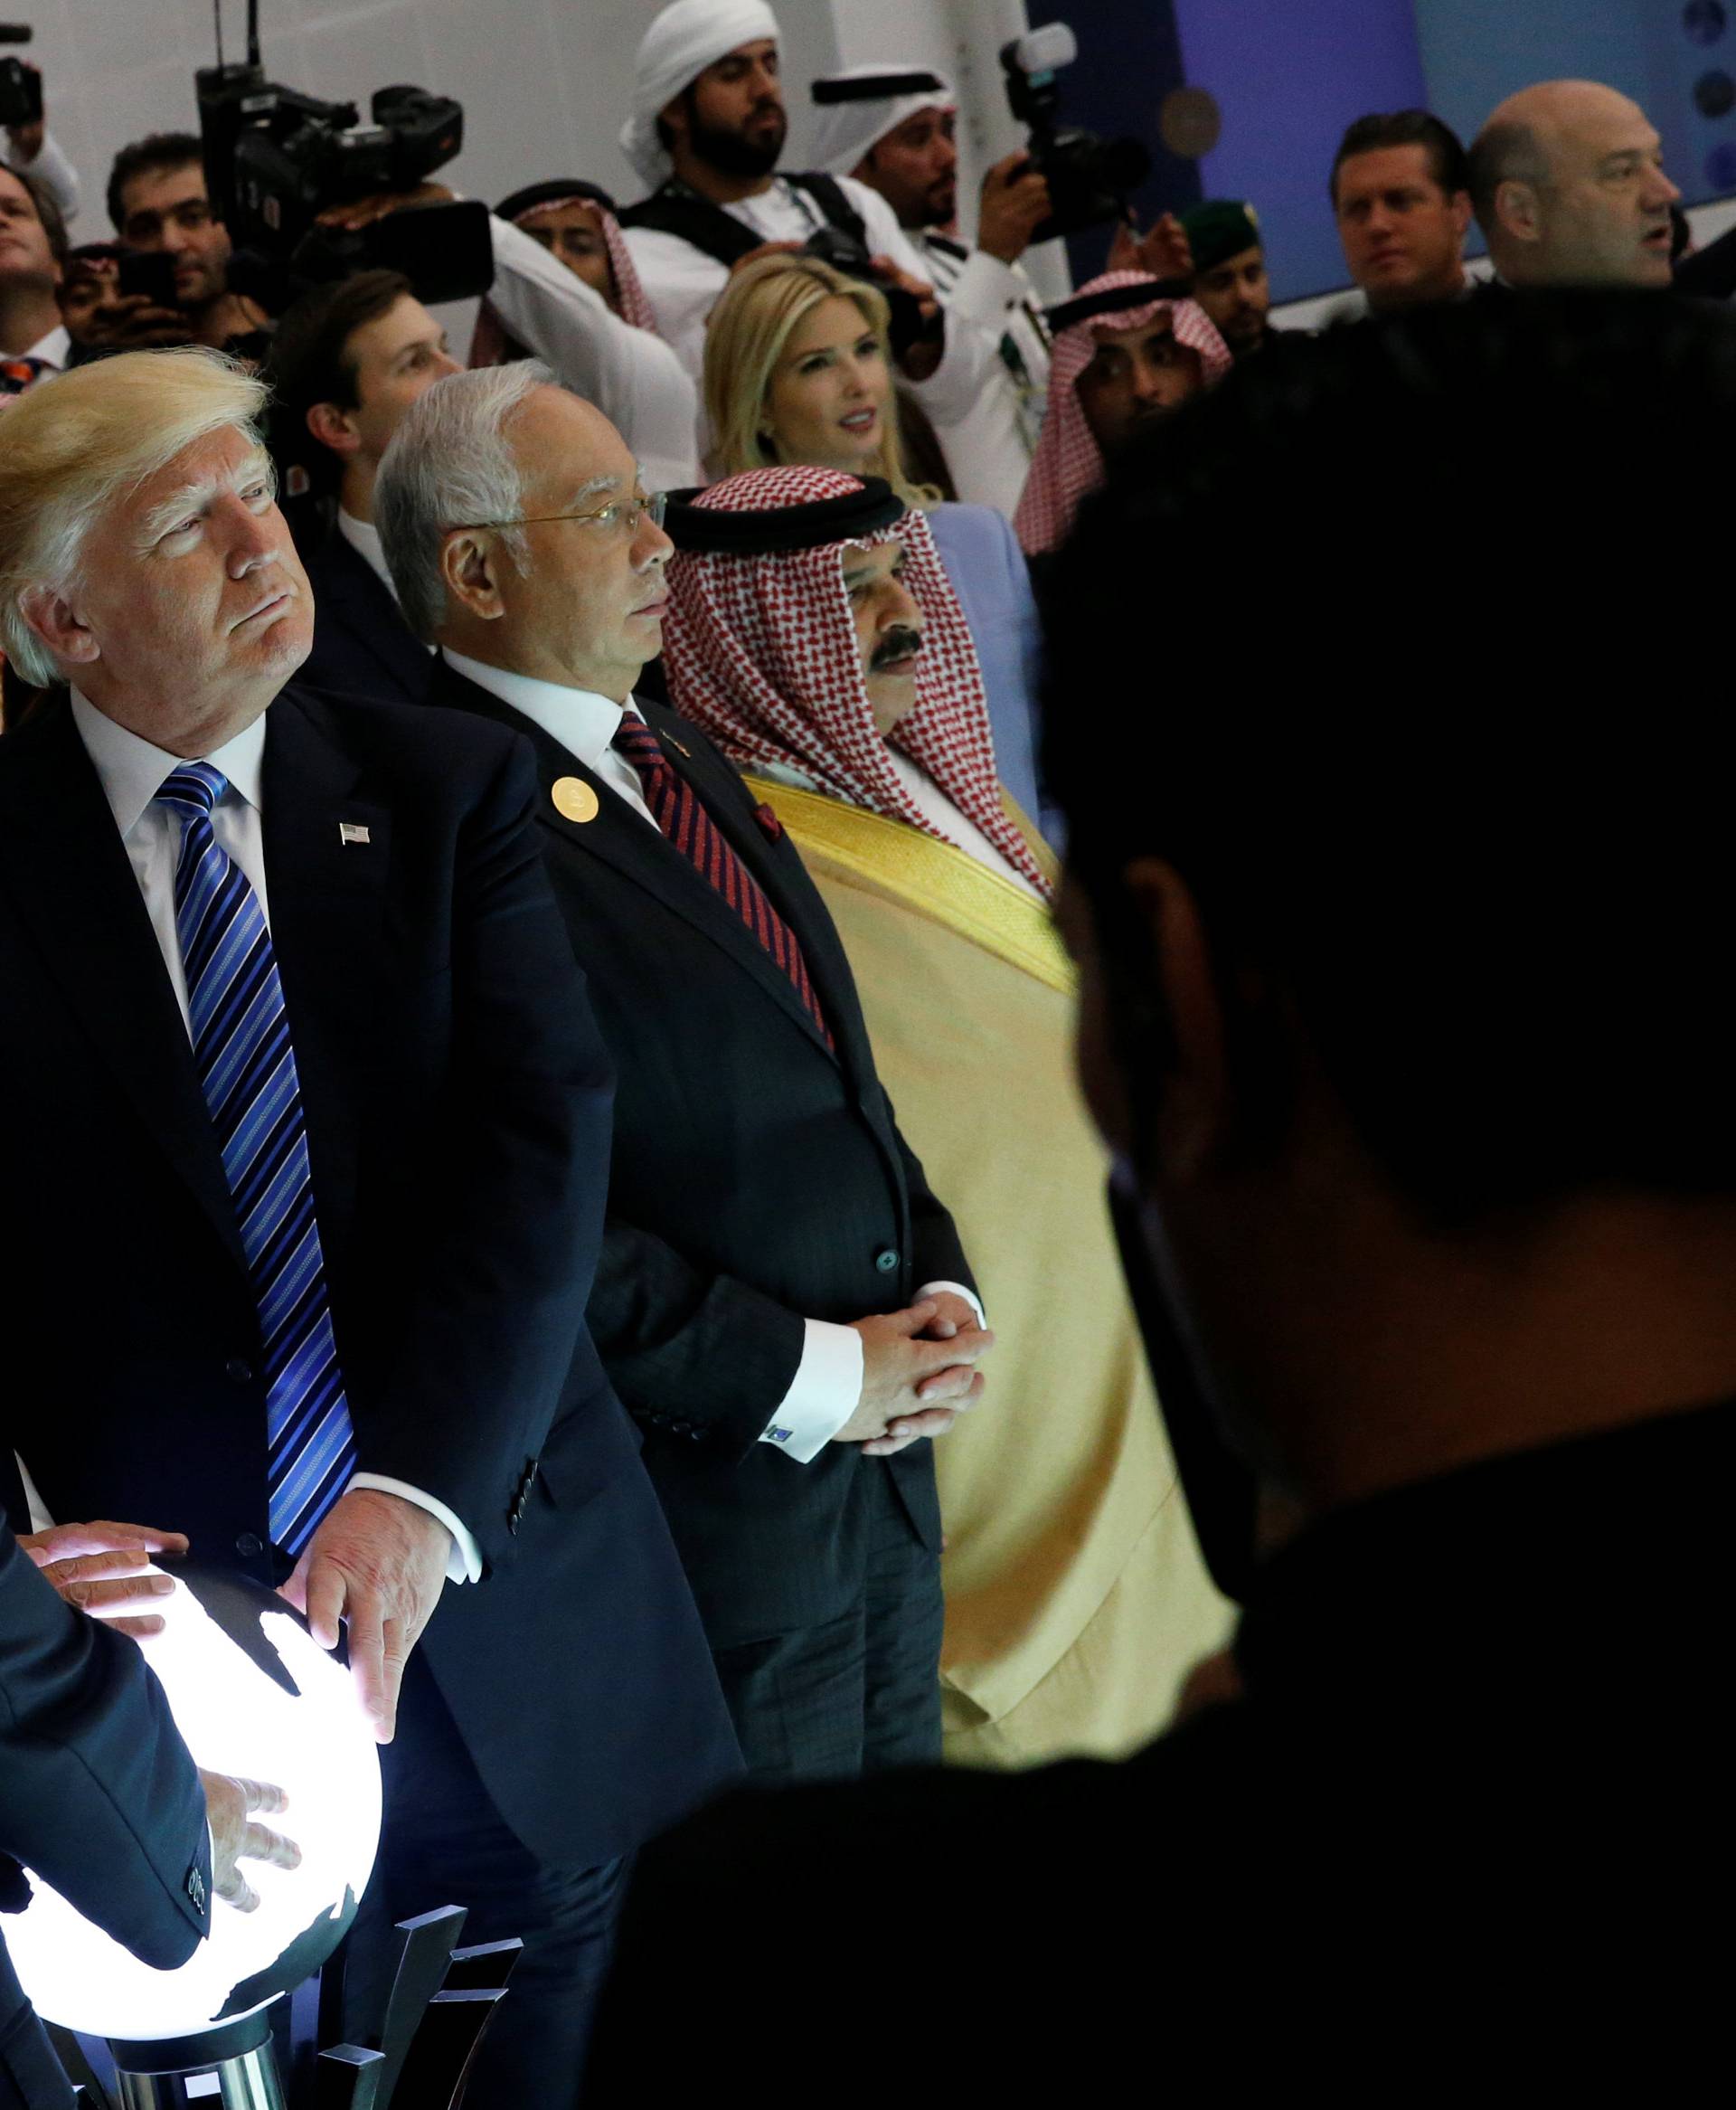 Trump and other leaders react to a wall of computer screens coming online as they tour the Global Center for Combatting Extremist Ideology in Riyadh